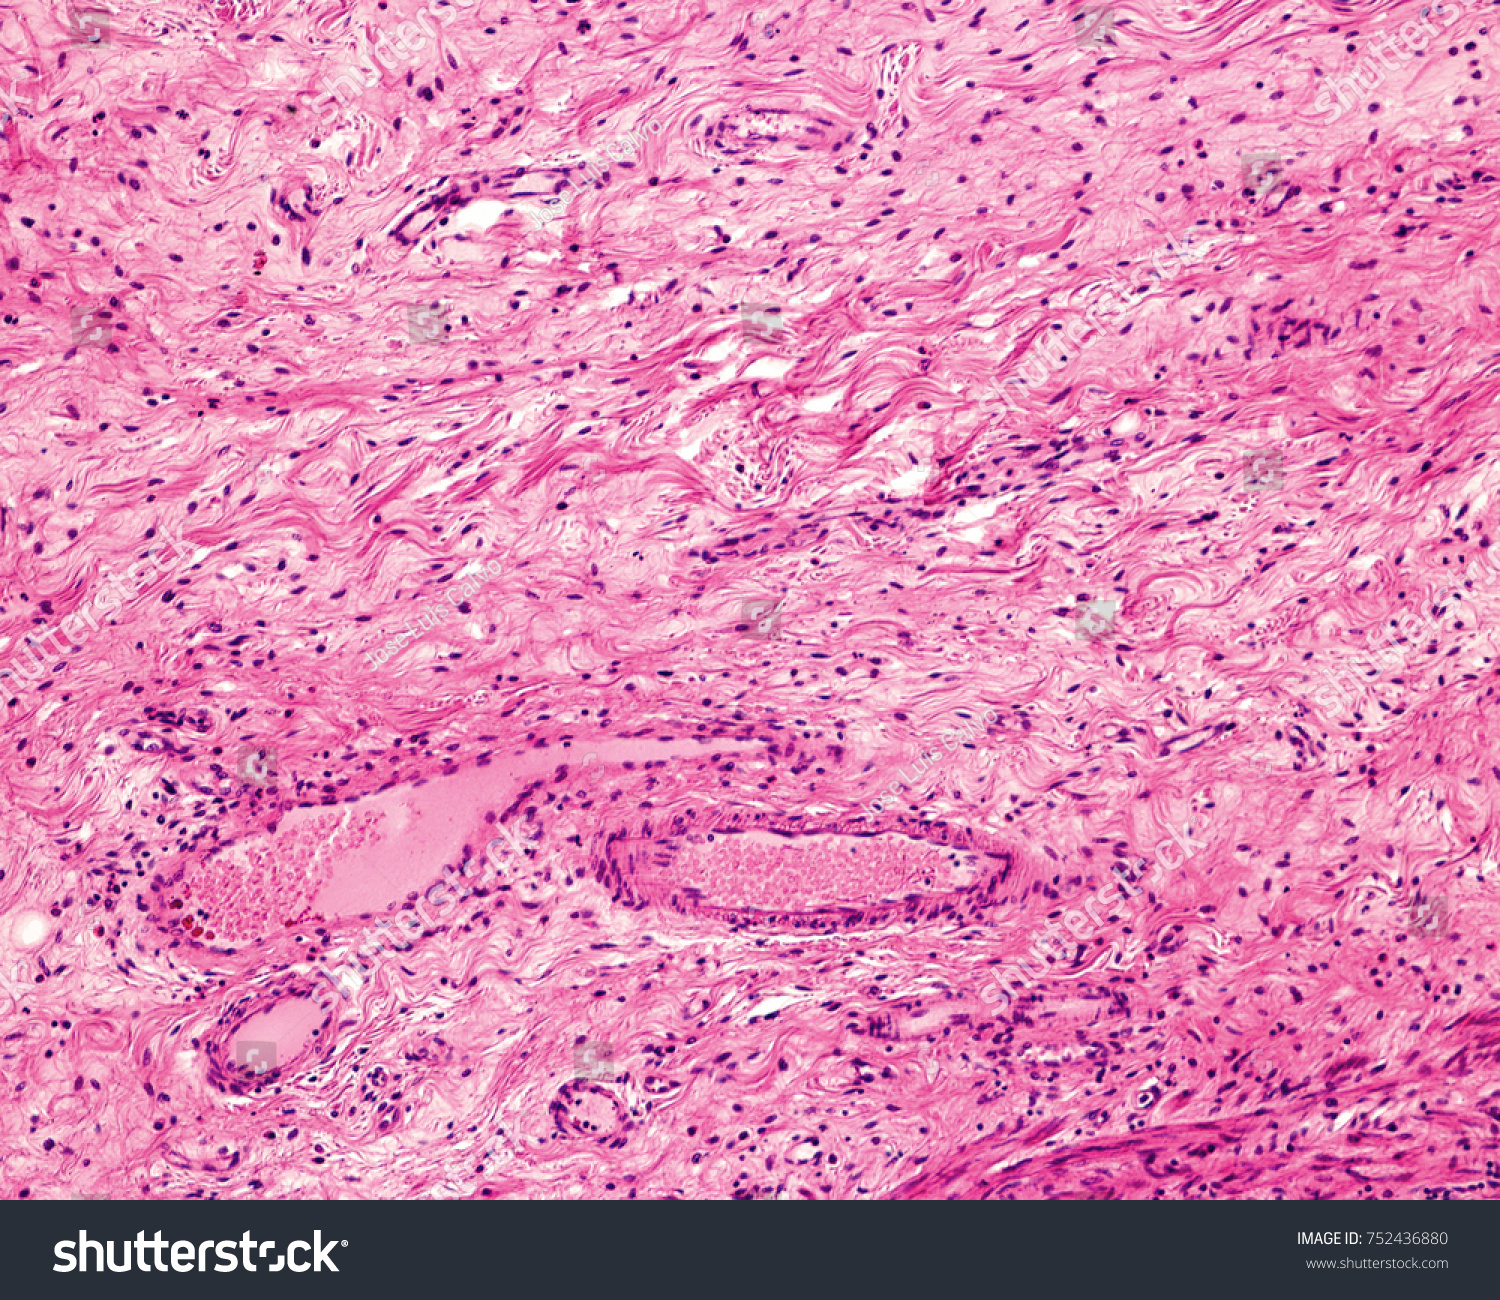 Example Typical Loose Connective Tissue Belonging Stock Photo